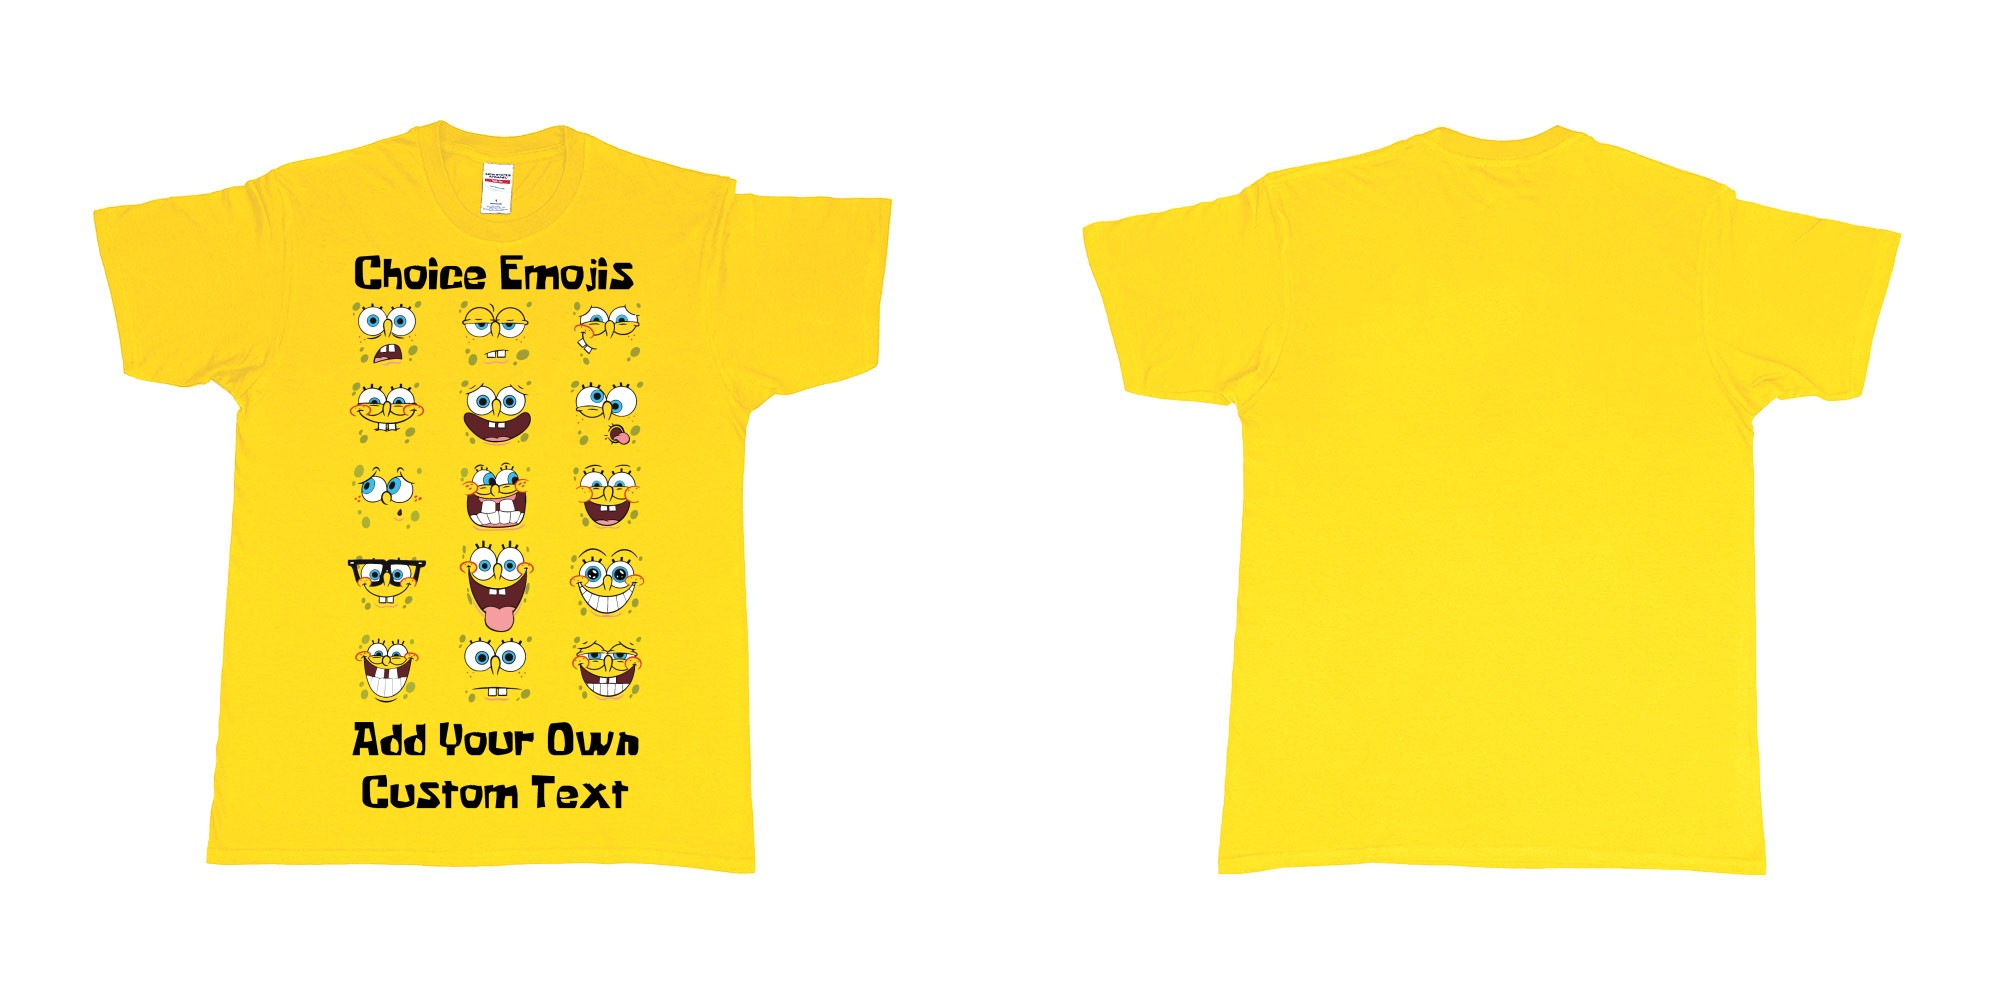 Custom tshirt design spongebob squarepants many faces emojis custum printing in fabric color daisy choice your own text made in Bali by The Pirate Way